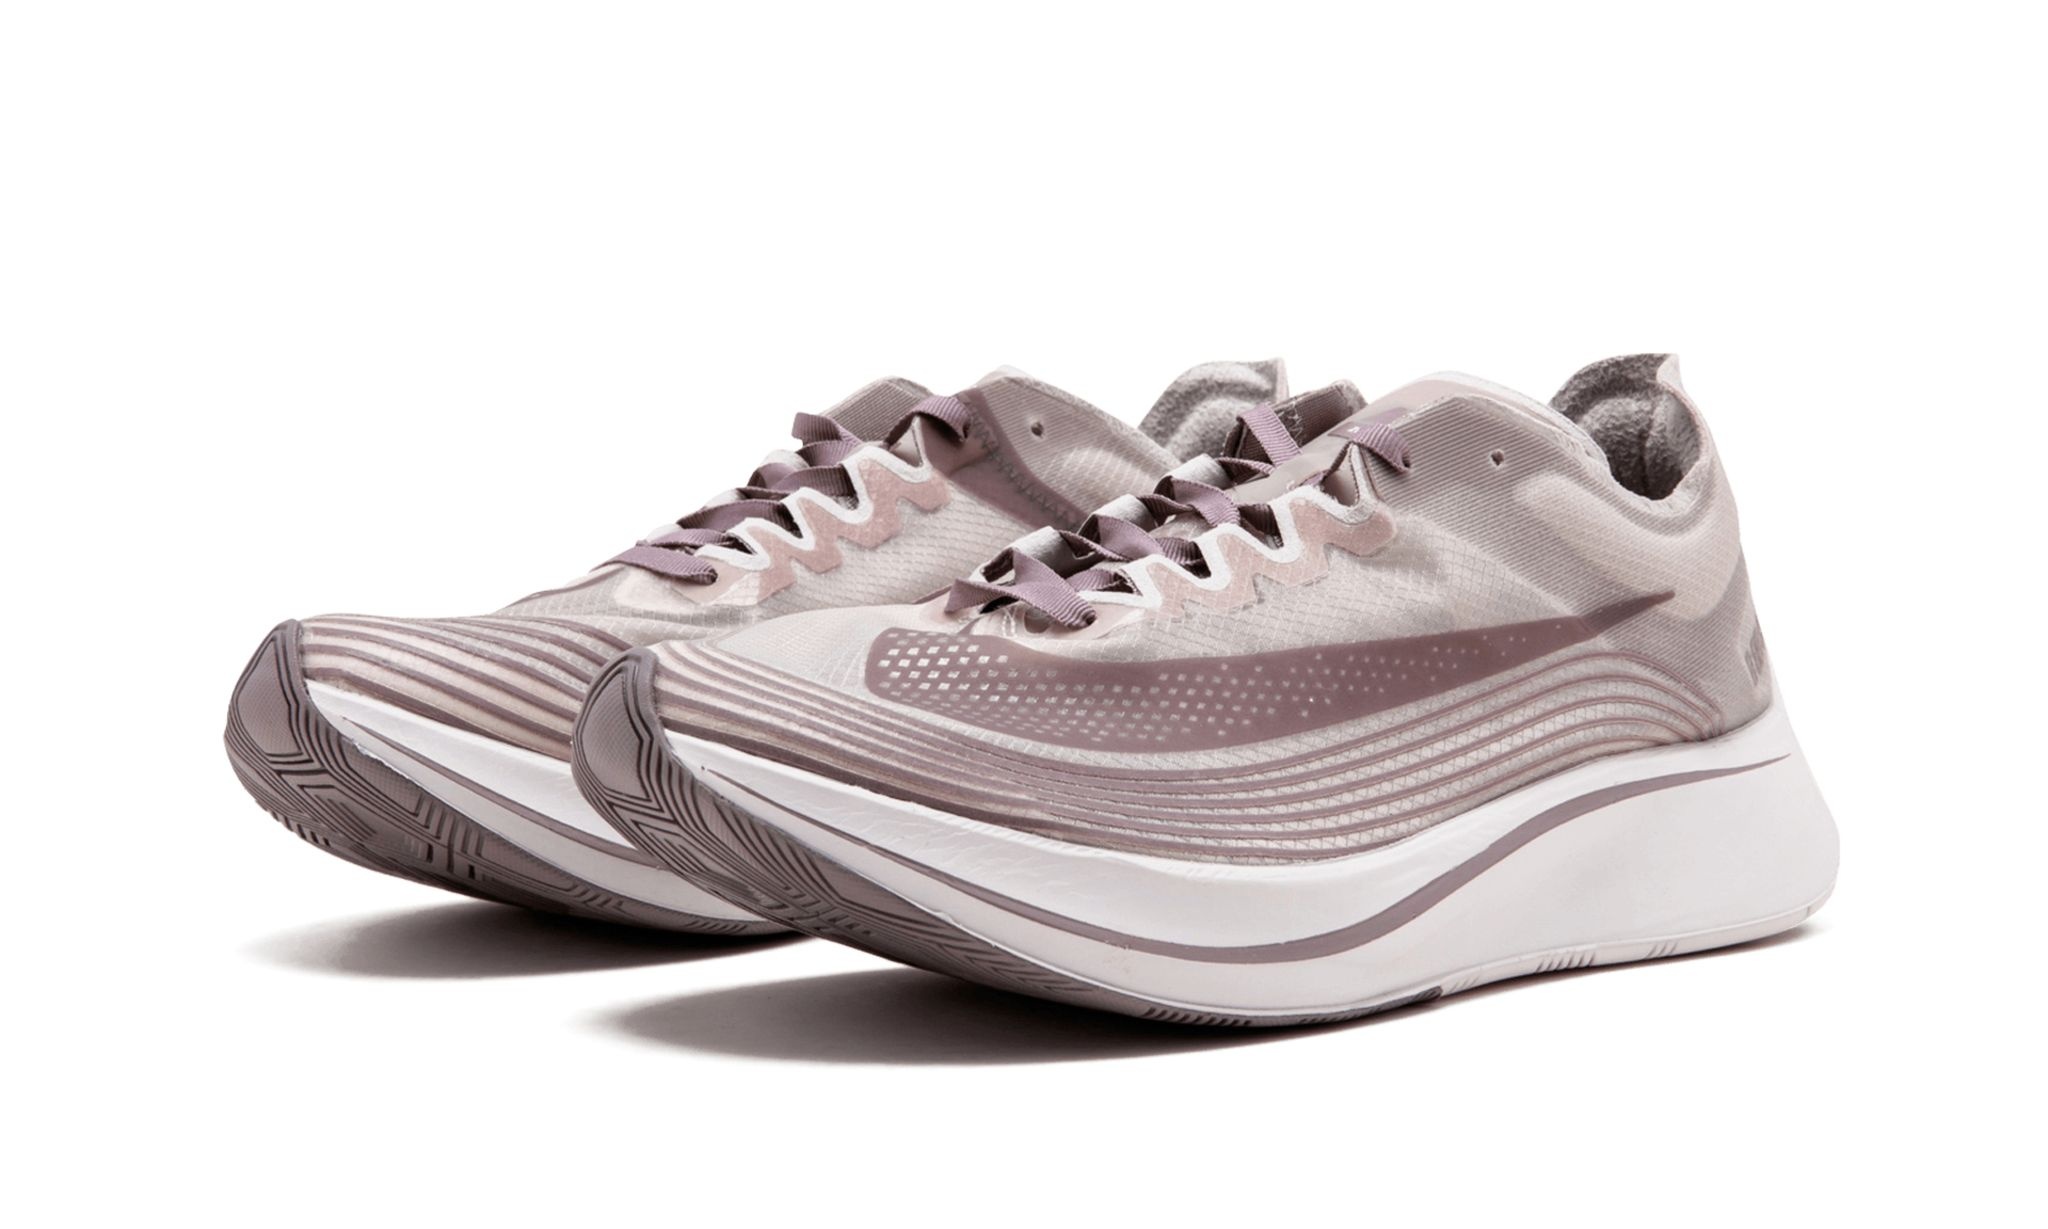 Lab Zoom Fly SP "Chicago" - 2